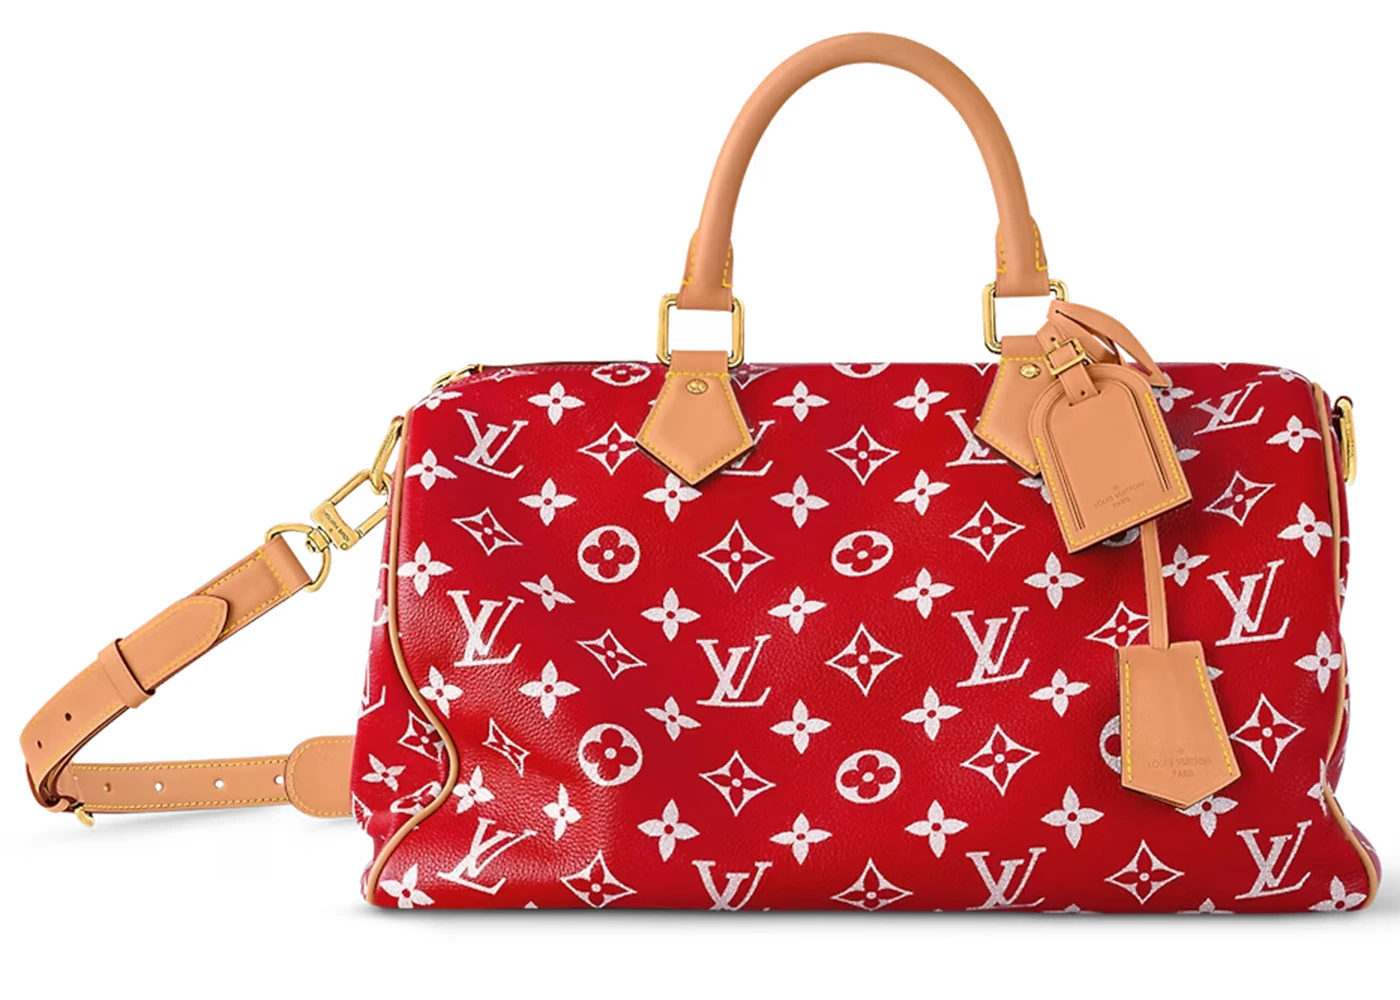 Louis Vuitton Speedy P9 Bandoulière 40 Monogram Leather Red in Soft ...